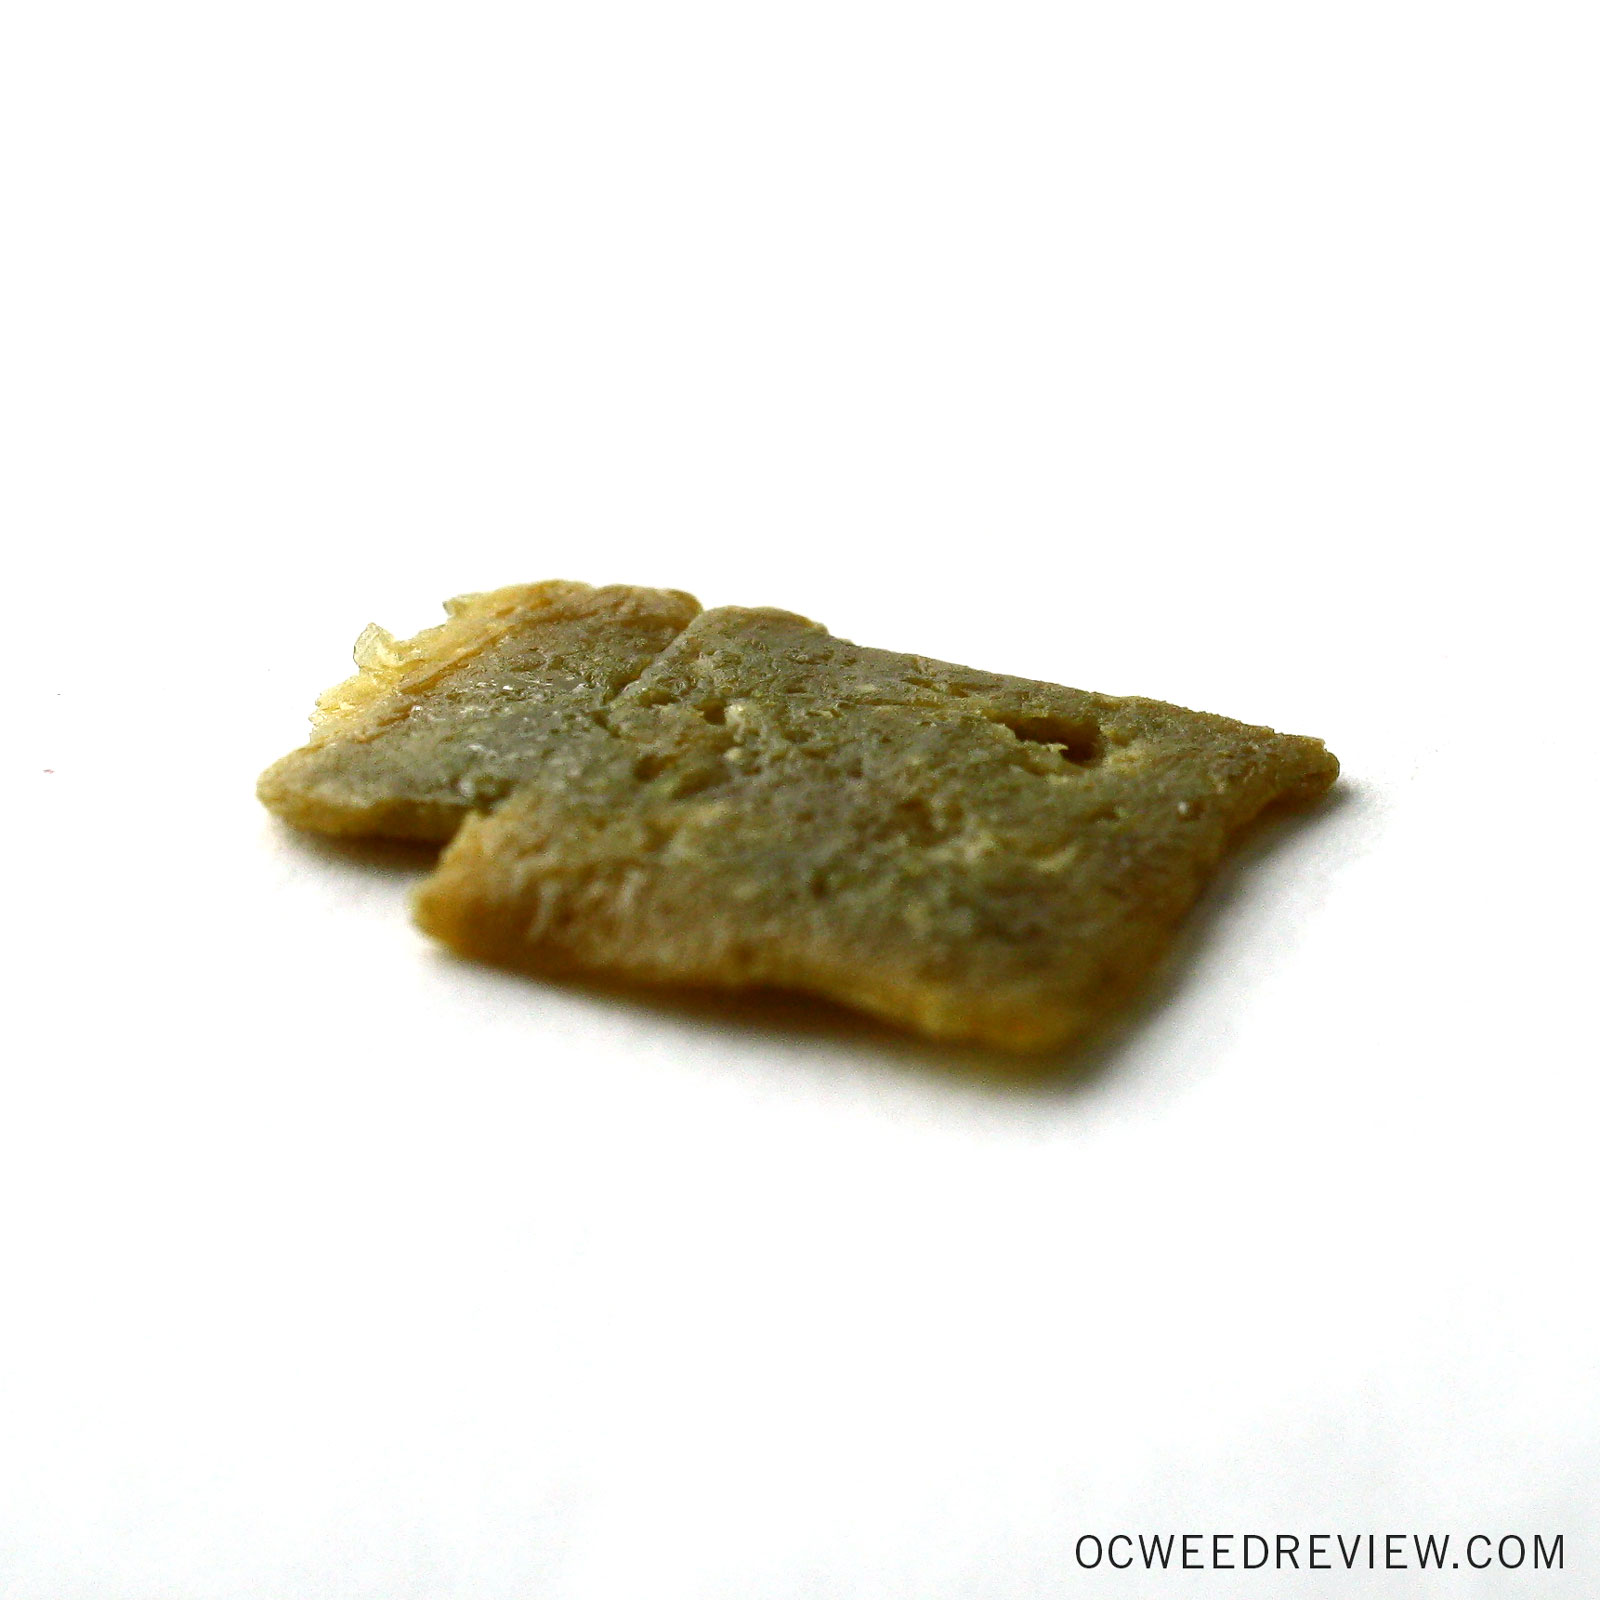 Remington Extracts White Widow Shatter Review